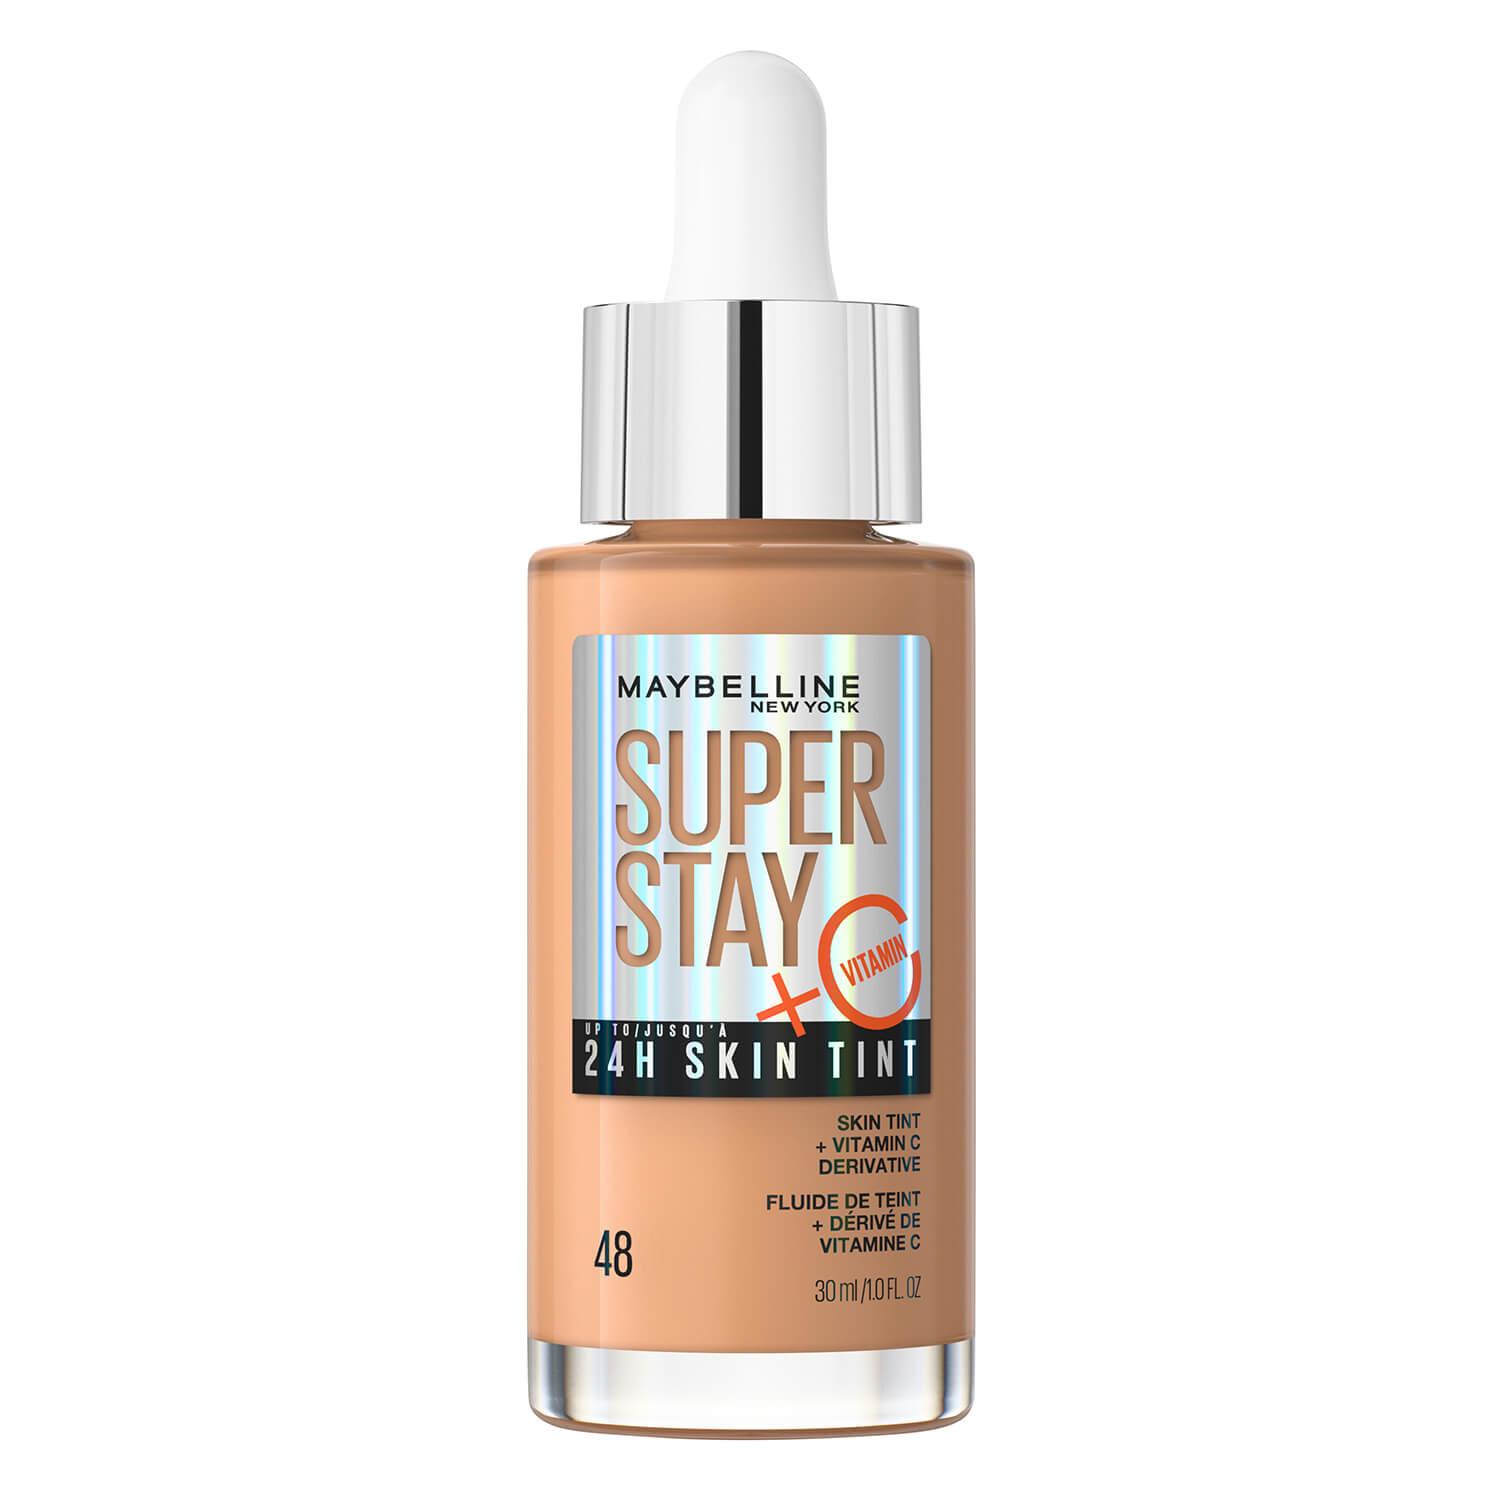 Maybelline NY Teint - Super Stay 24H Skin Tint Sun Beige 48